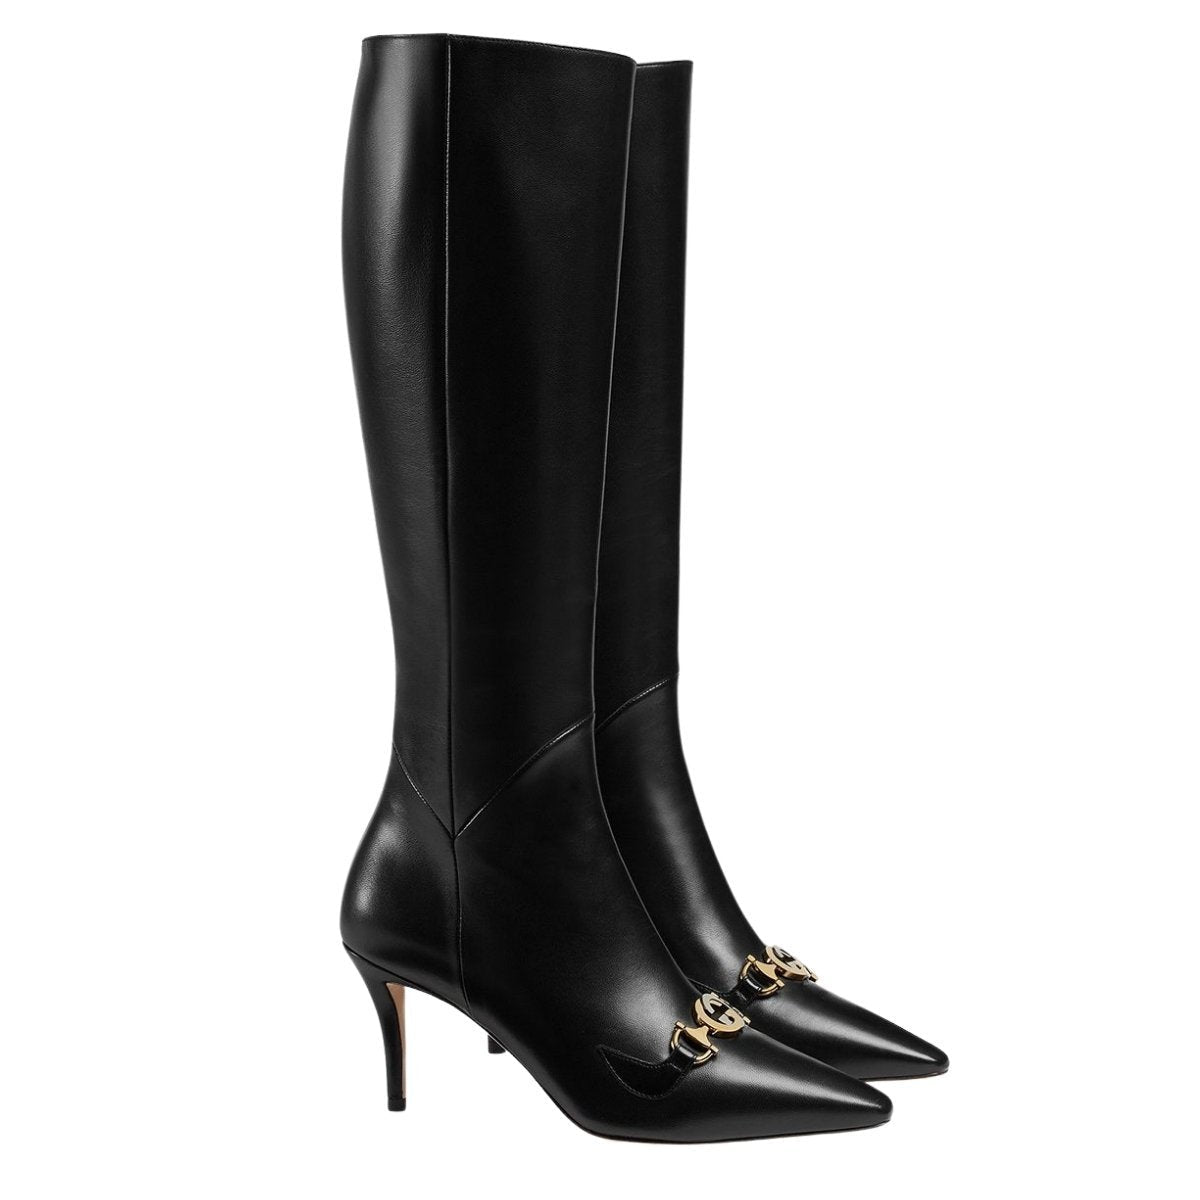 Zumi Black Leather High Boots